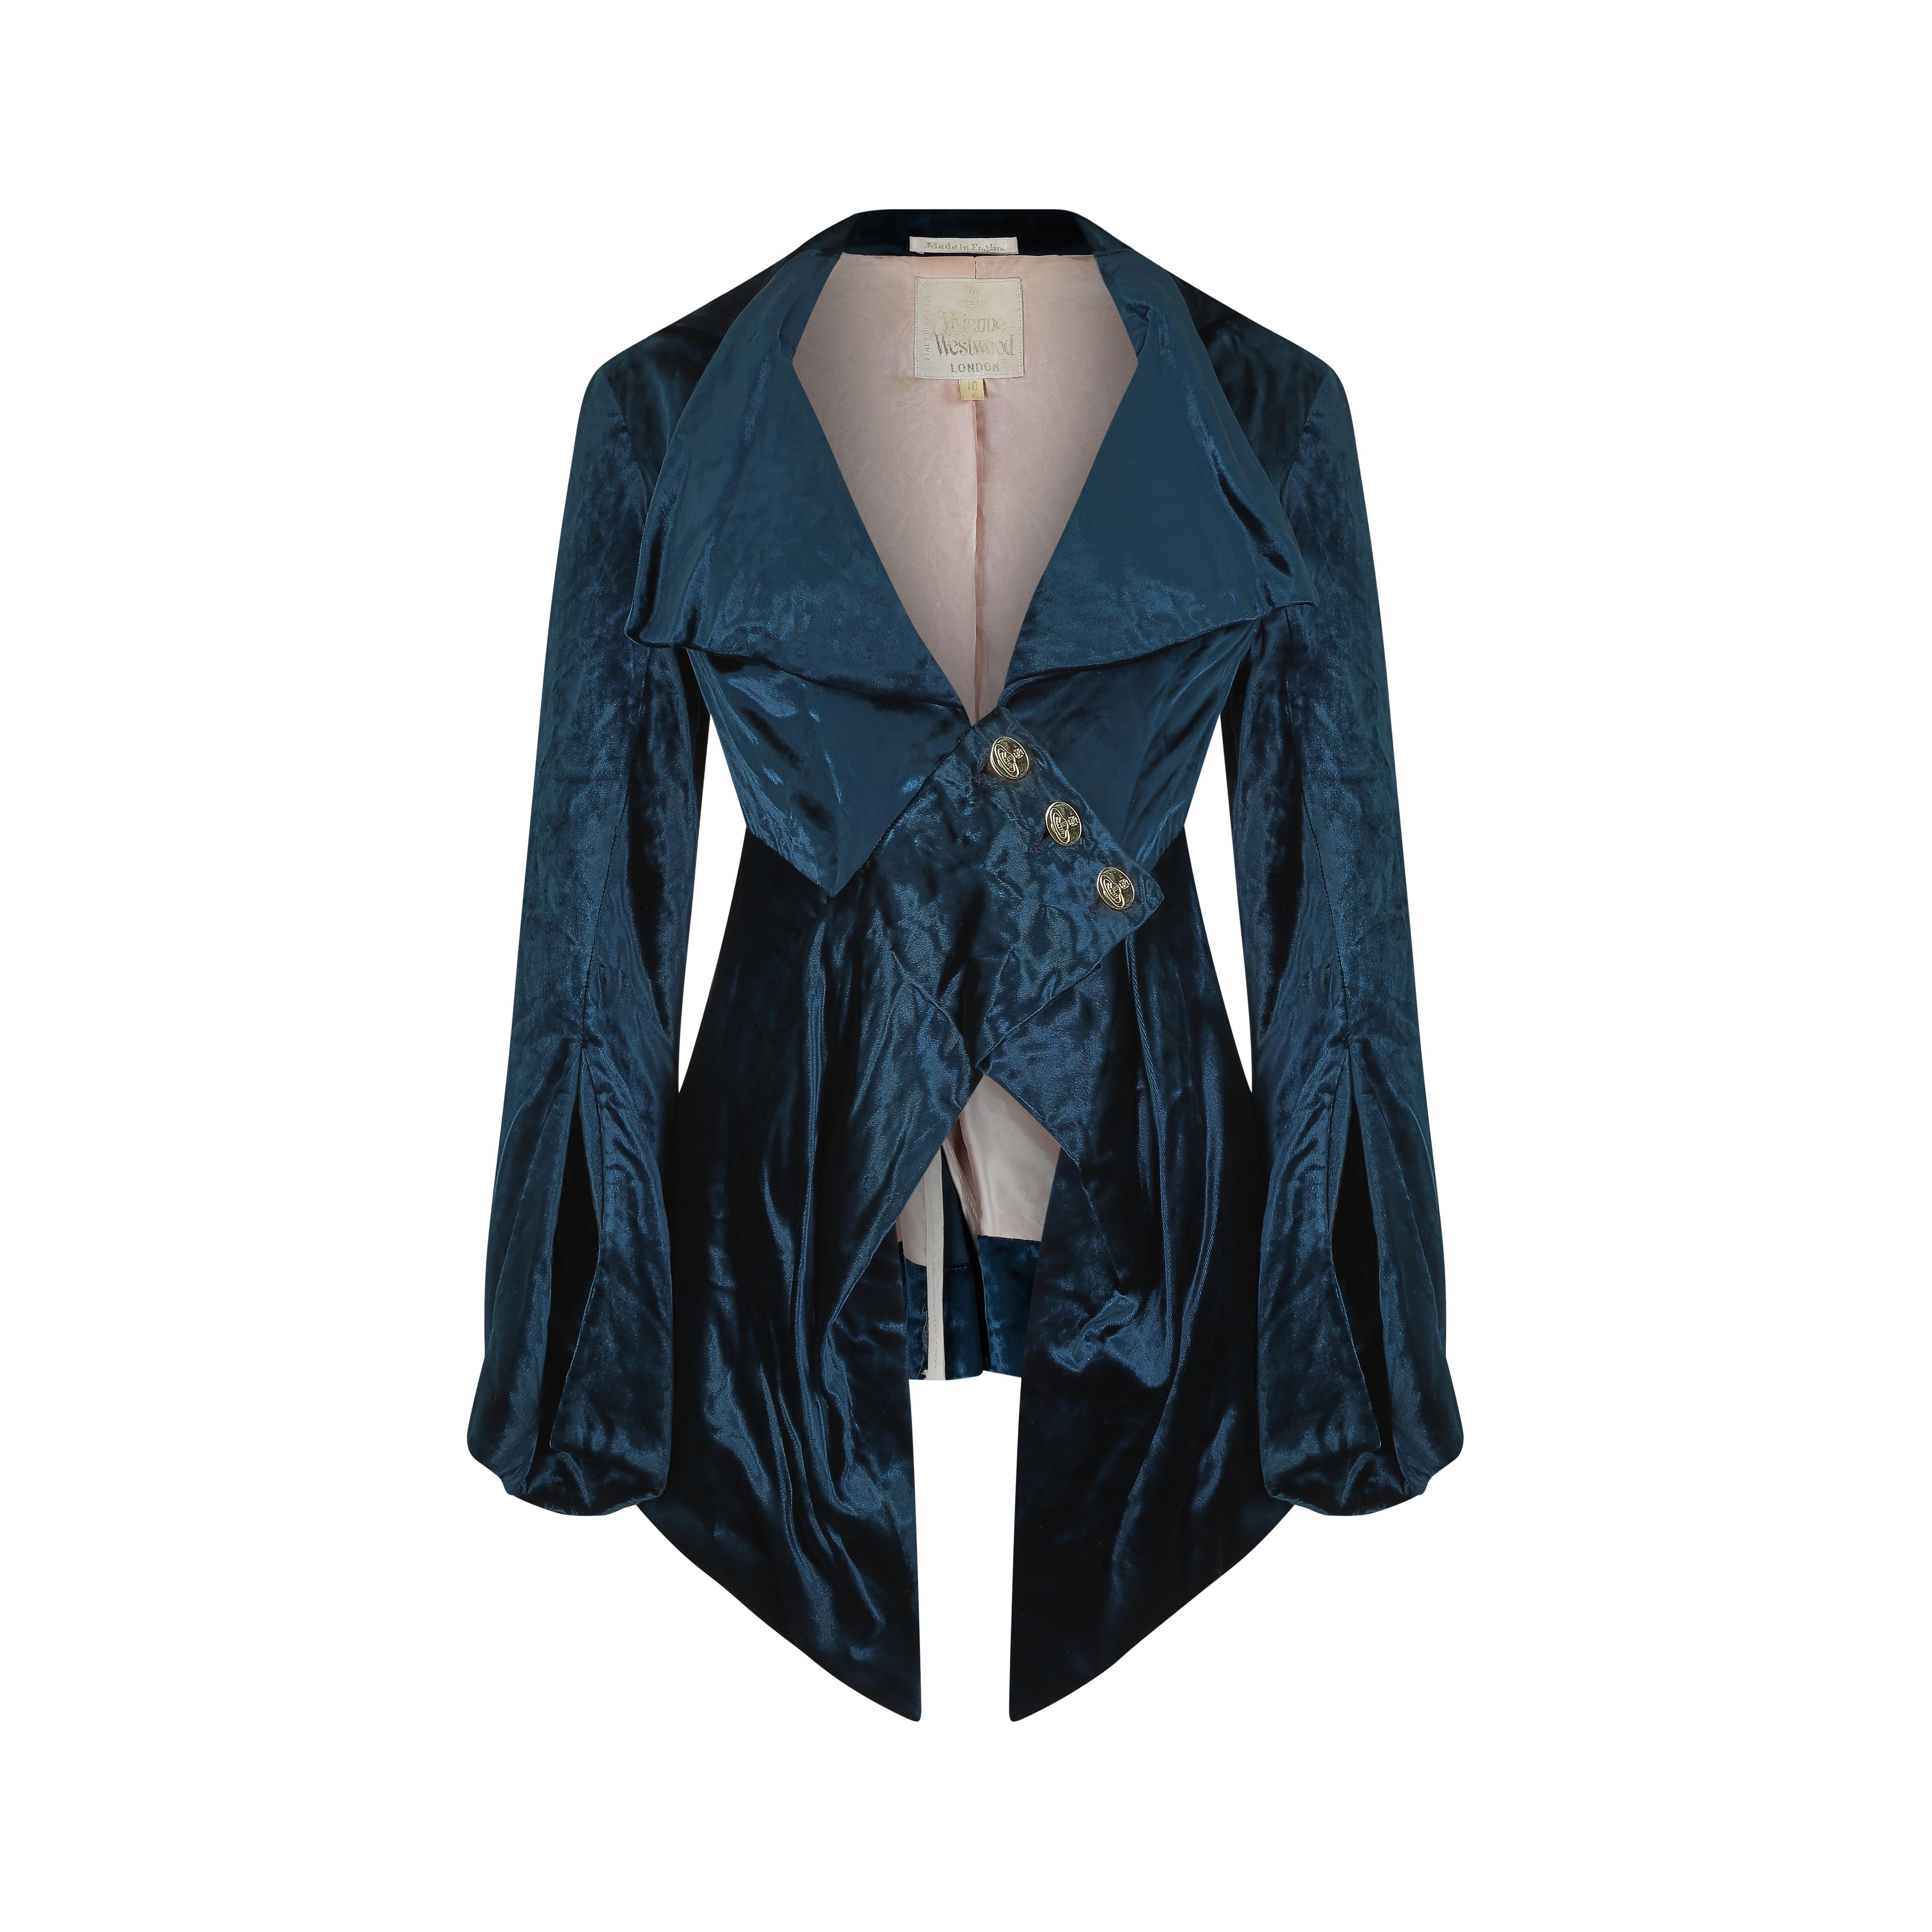 This incredible teal blue velvet couture frock coat by Vivienne Westwood is an excellent example of her interest in Victorian silhouettes and traditional 'dandy' styles. It featured heavily in her Fall/Winter 1994 collection, which came at the very